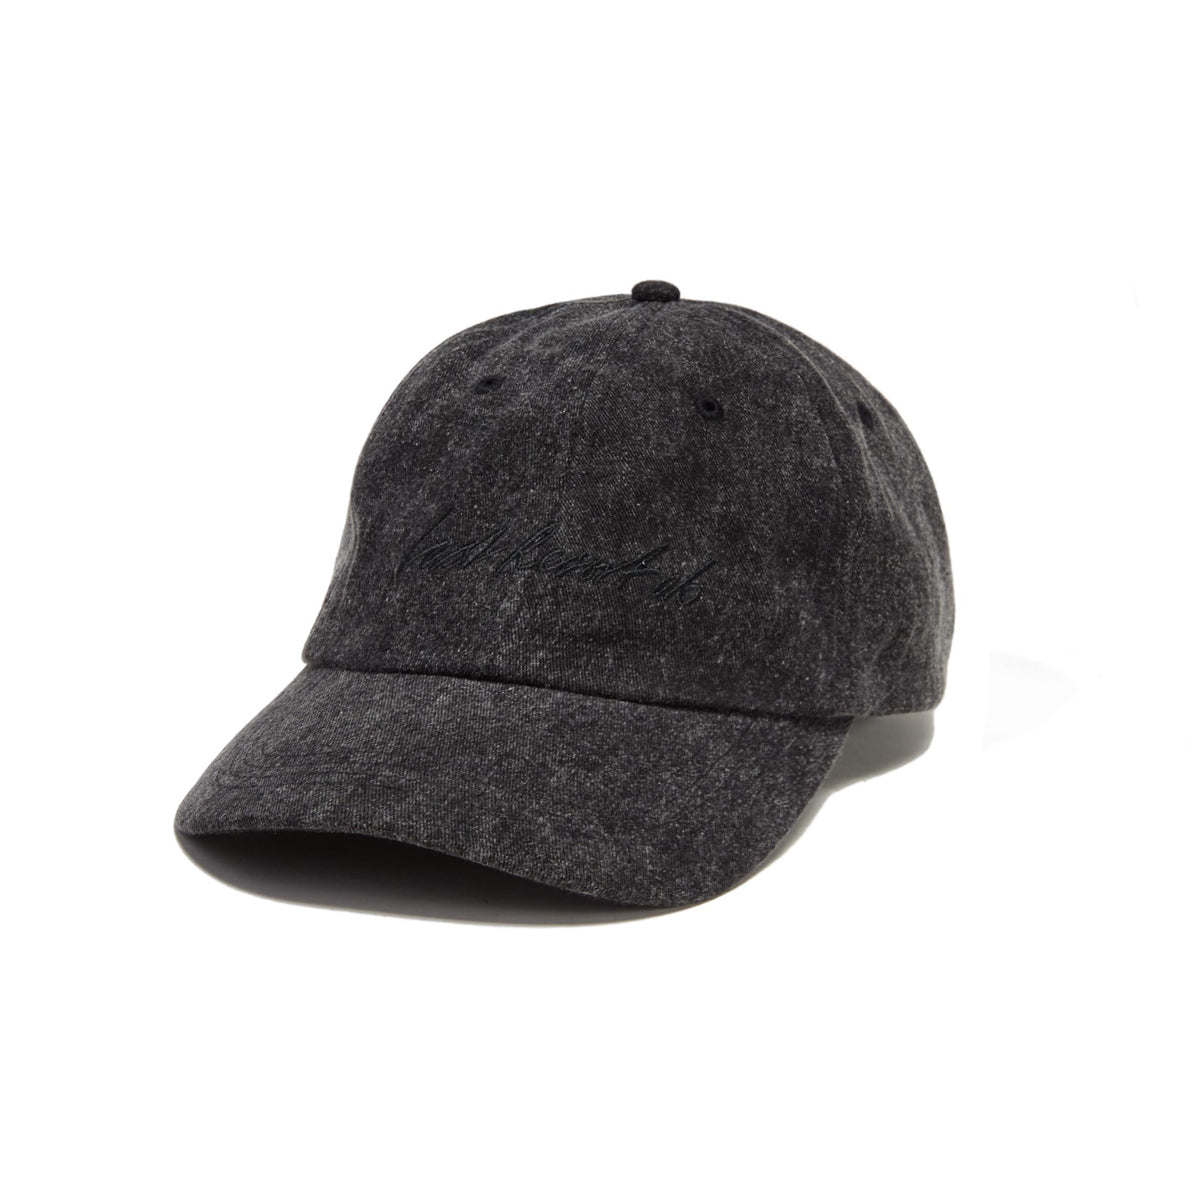 Sign Daddy 6 Panel Cap, Washed Black